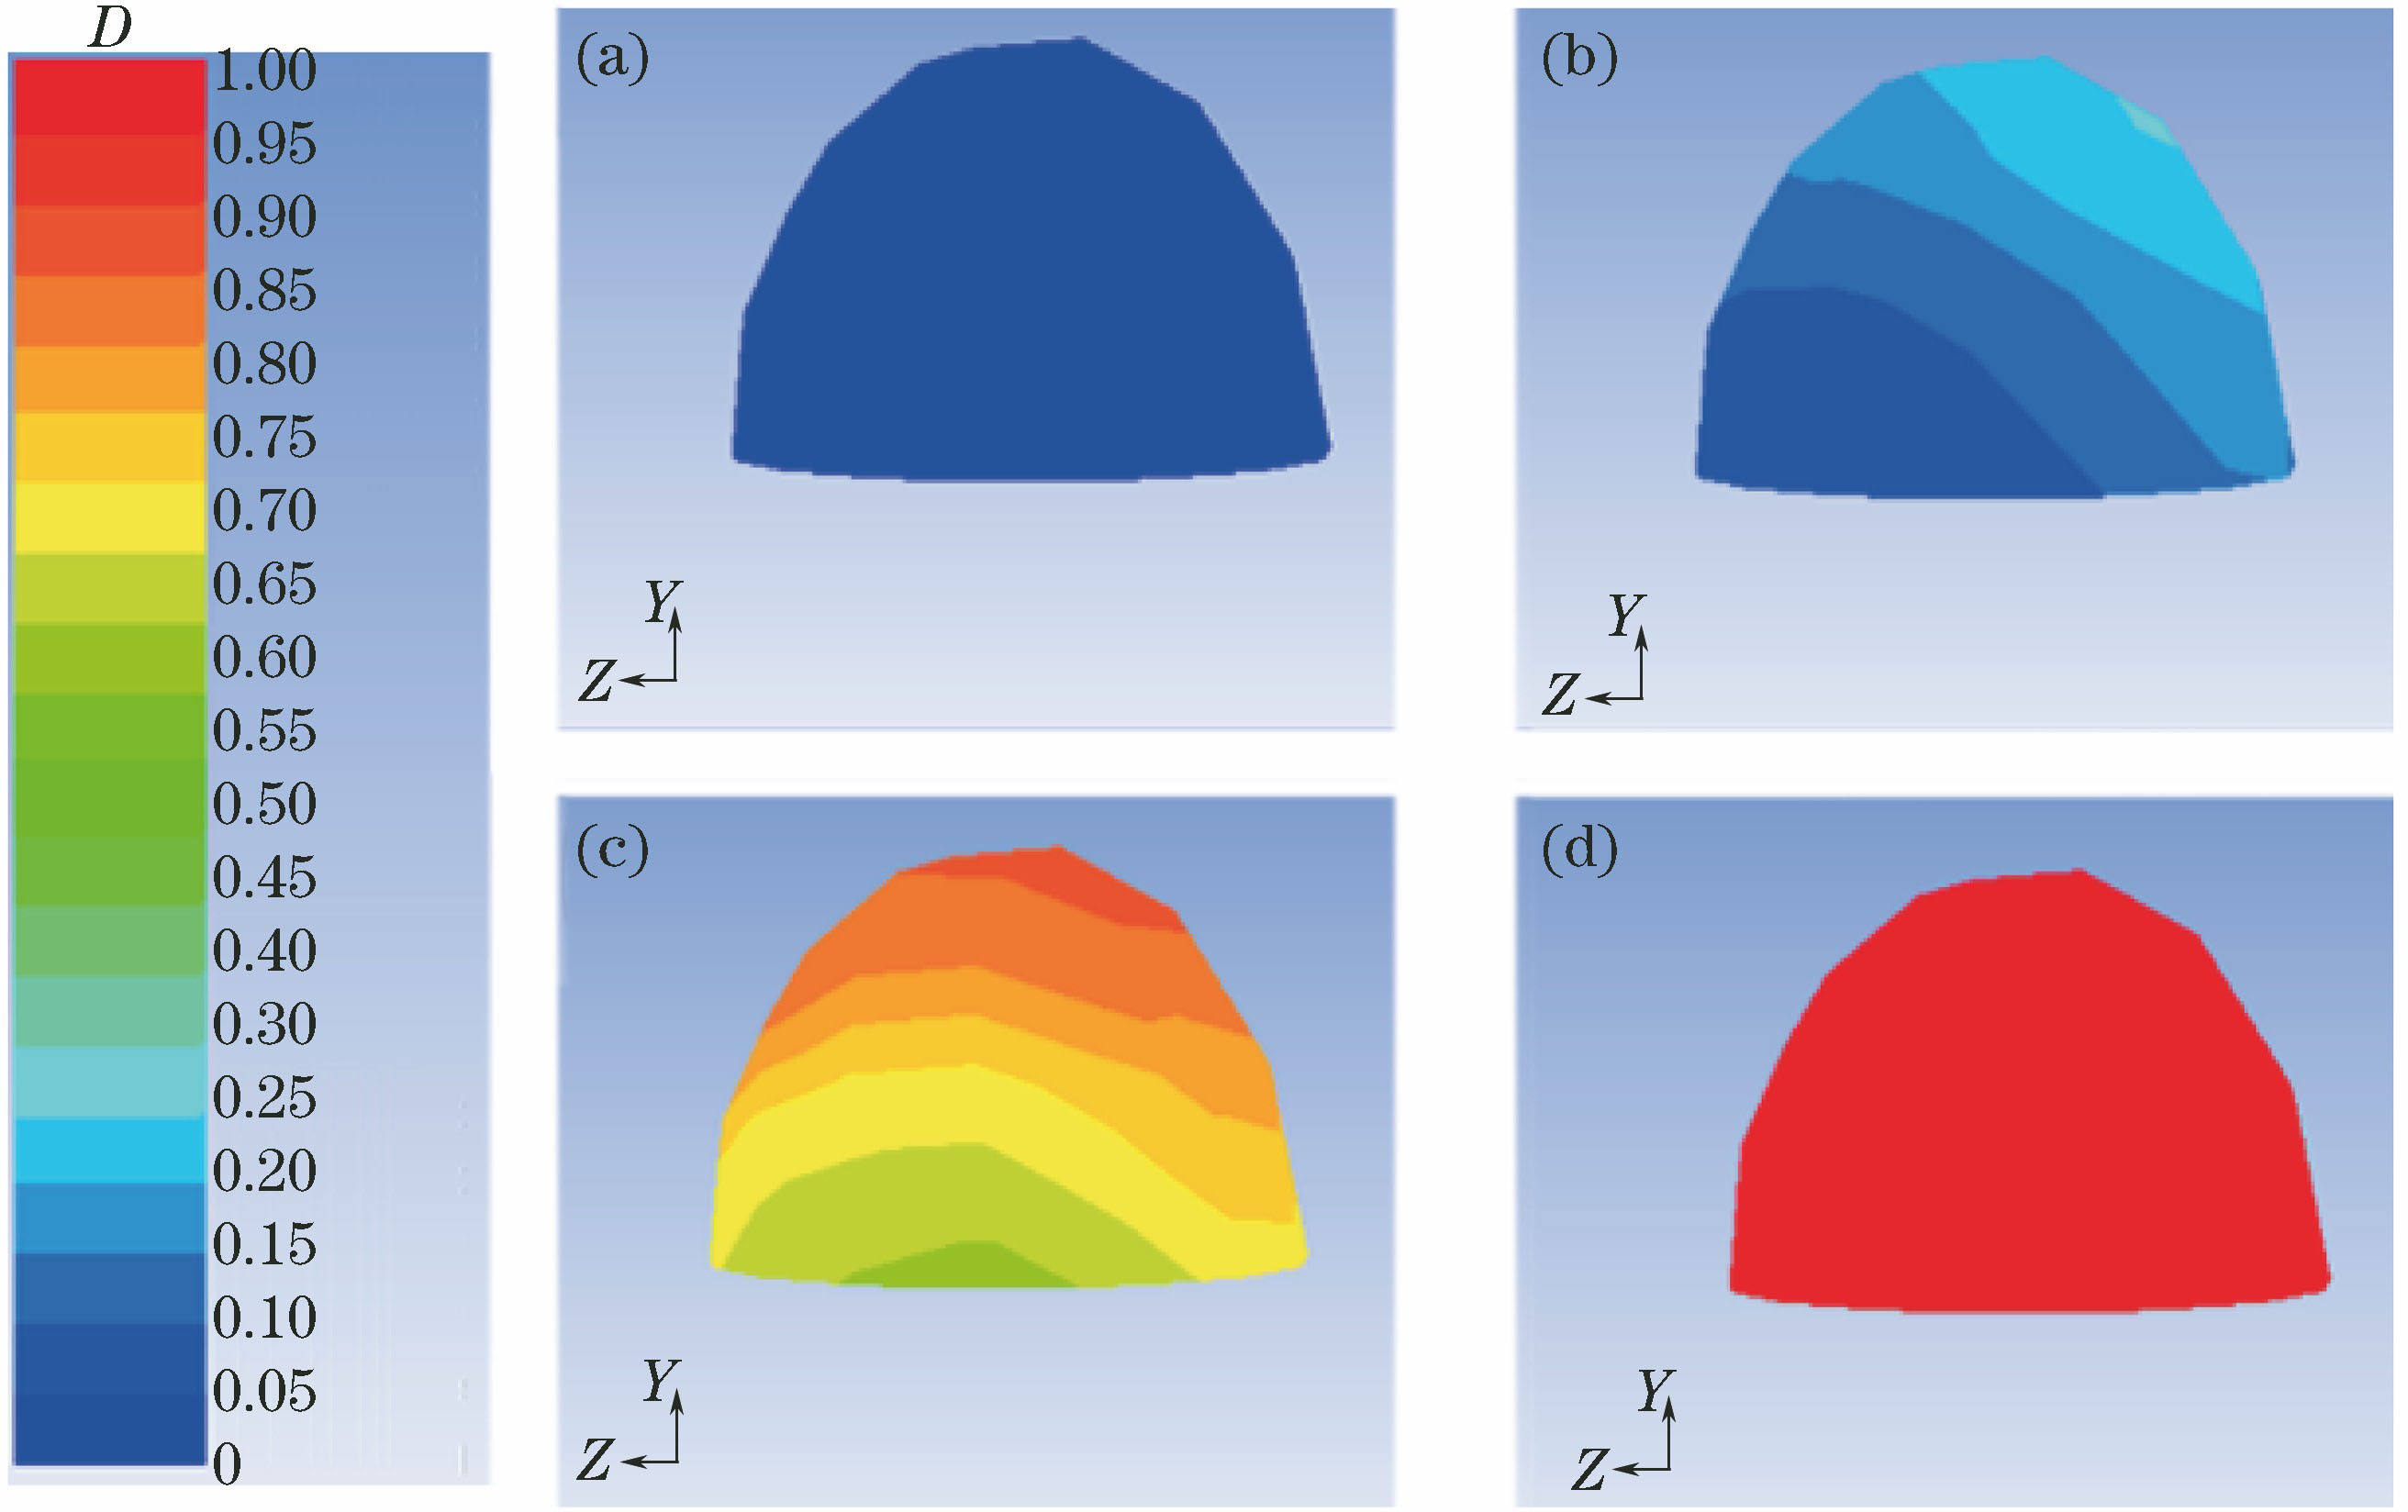 Concentration distributions of TiCl4 gas on hemispheric substrate surface under different moments. (a) 100 ms; (b) 150 ms; (c) 200 ms; (d) 250 ms